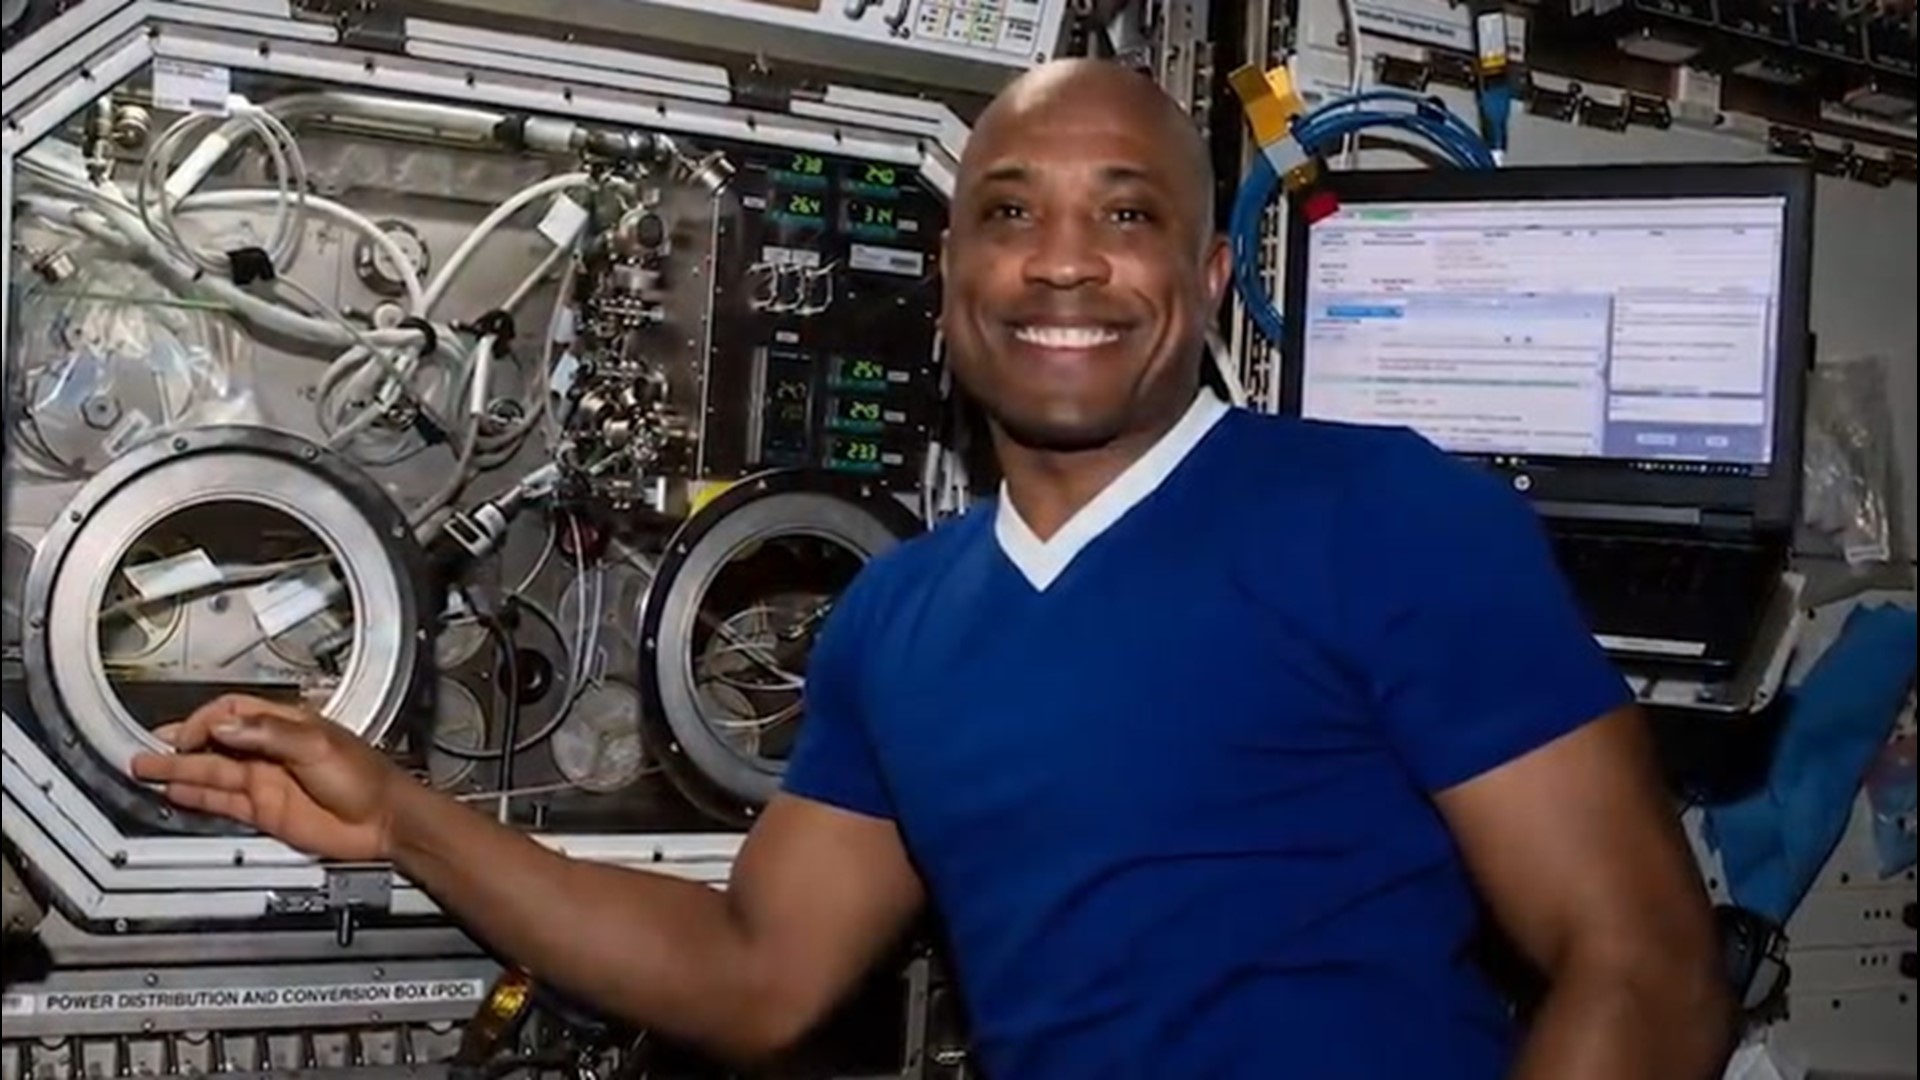 In recognition of Black History Month, Astronaut Victor Glover spoke with Vice President Kamala Harris about his achievements aboard the International Space Station and the next steps in his career.